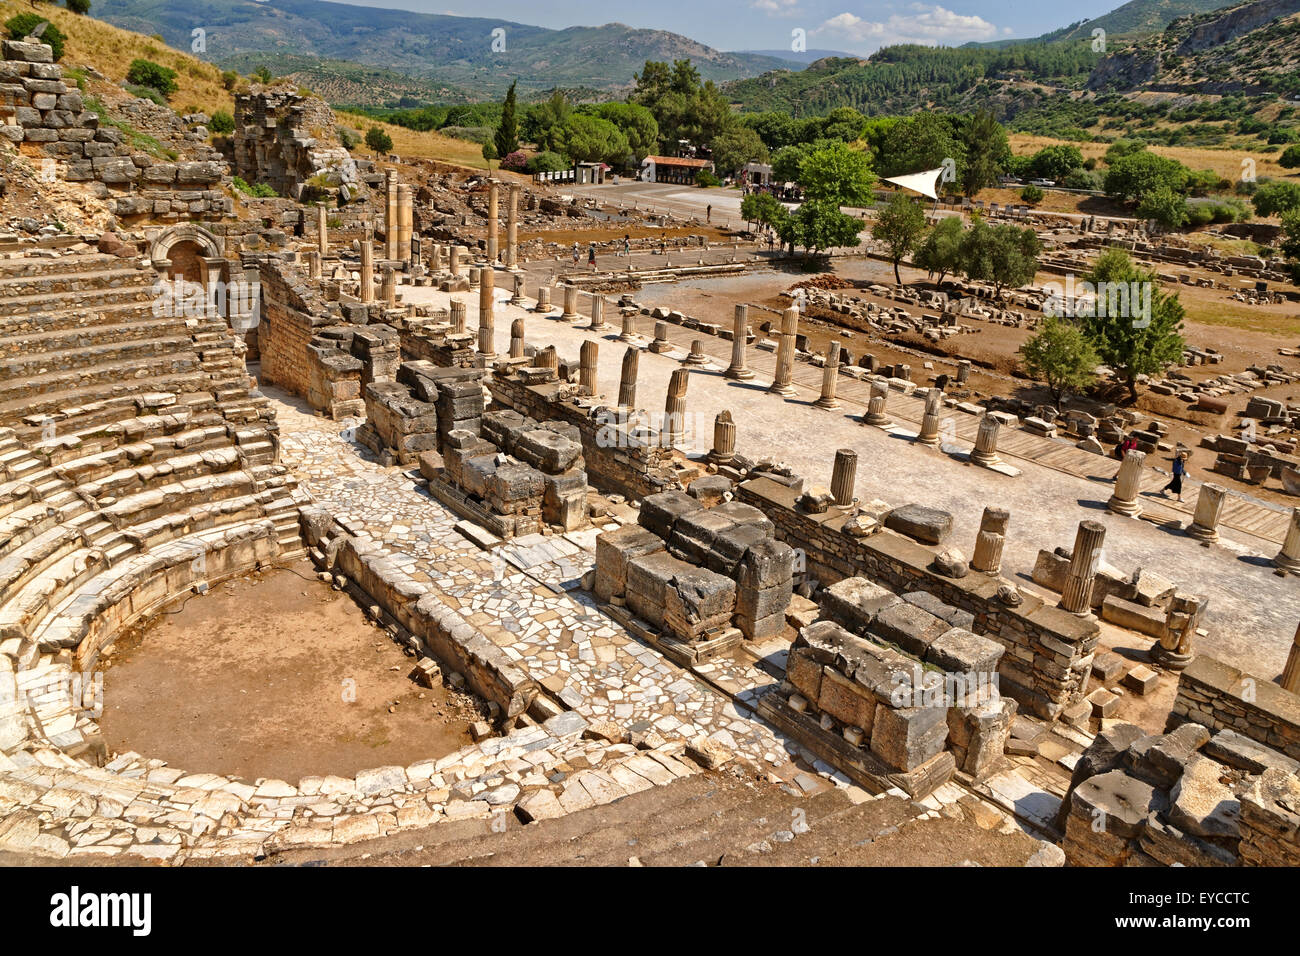 Small Odeon amphitheatre at Ephesus near Selcuk, Kusadasi, Turkey,an ancient city with a history of Greek and Roman occupation. Stock Photo